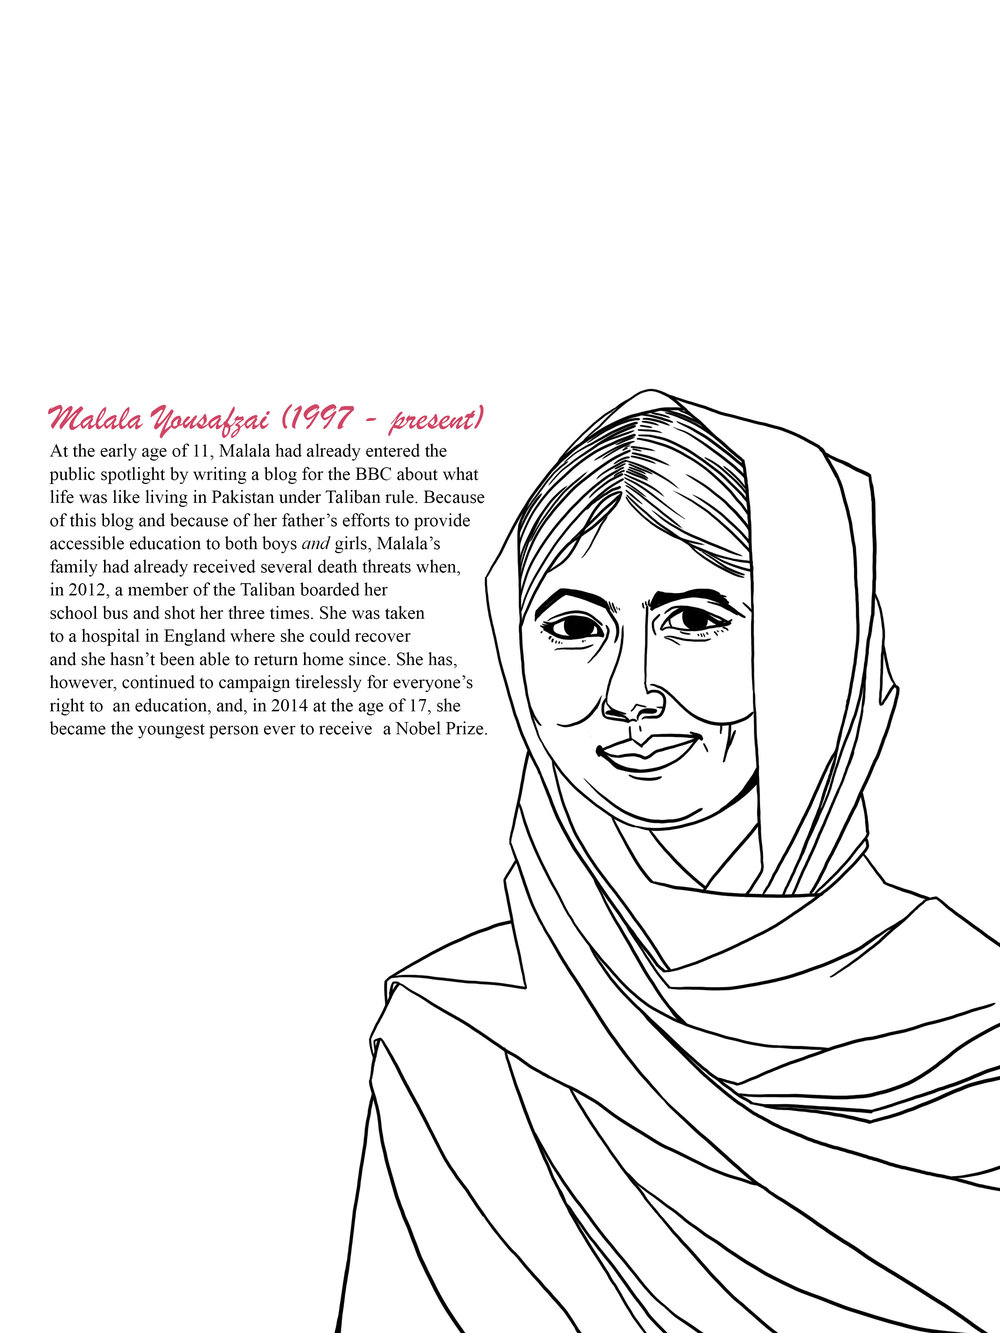 Women of history coloring book â anne lambelet illustration